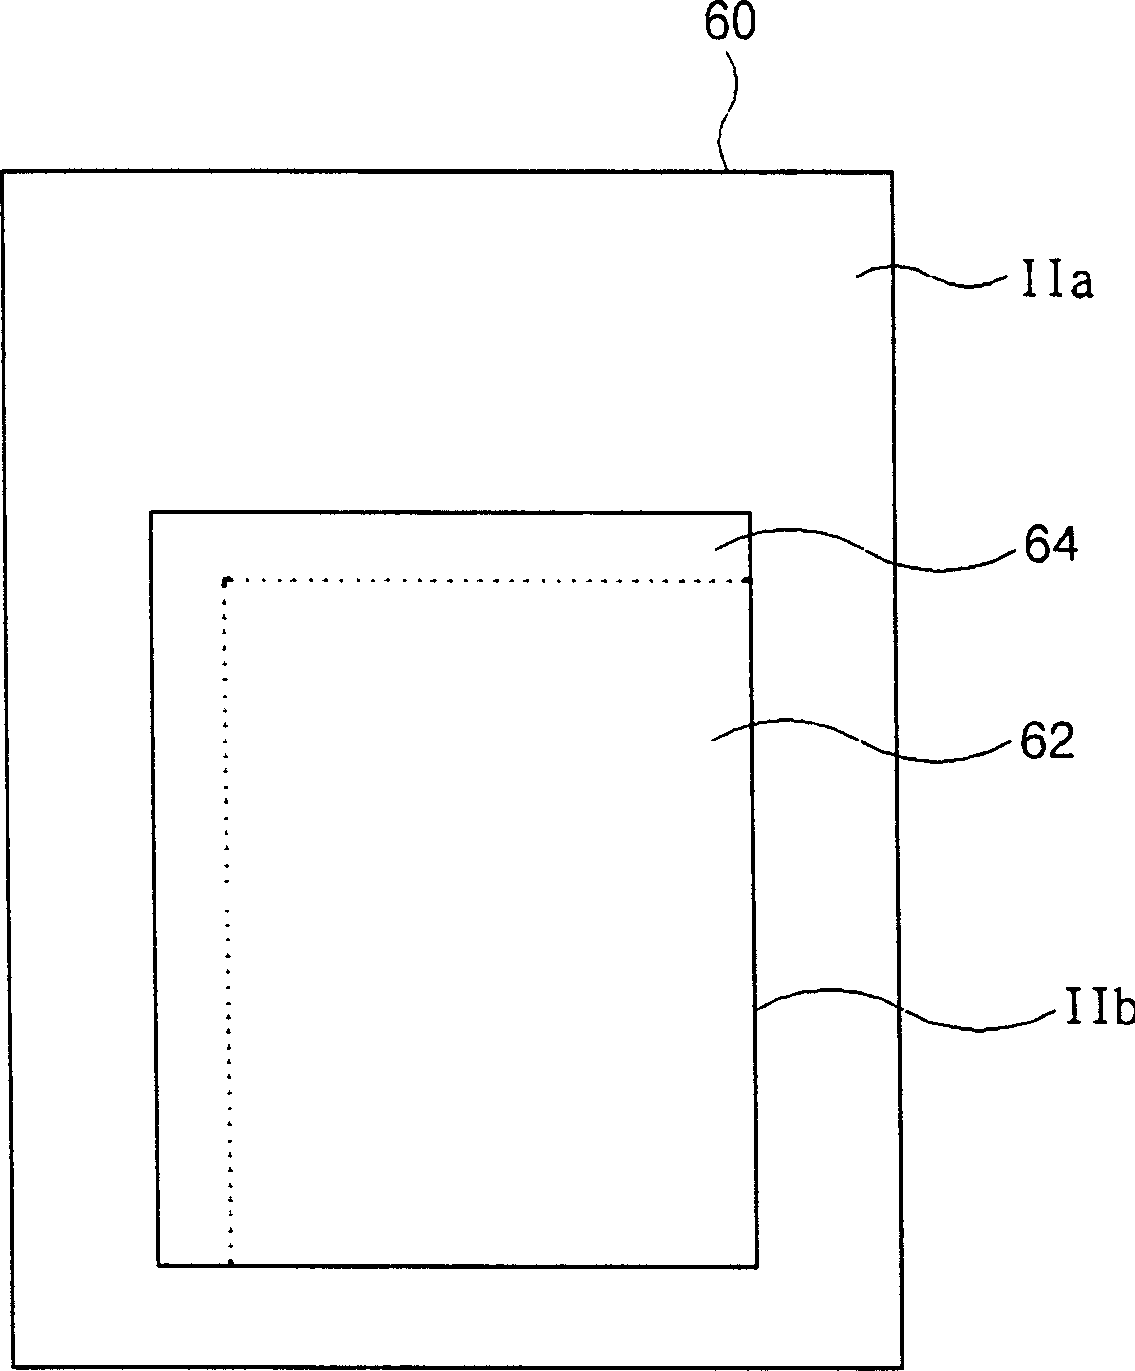 Liquid crystal cell process for in-plane switching mode liquid crystal display device